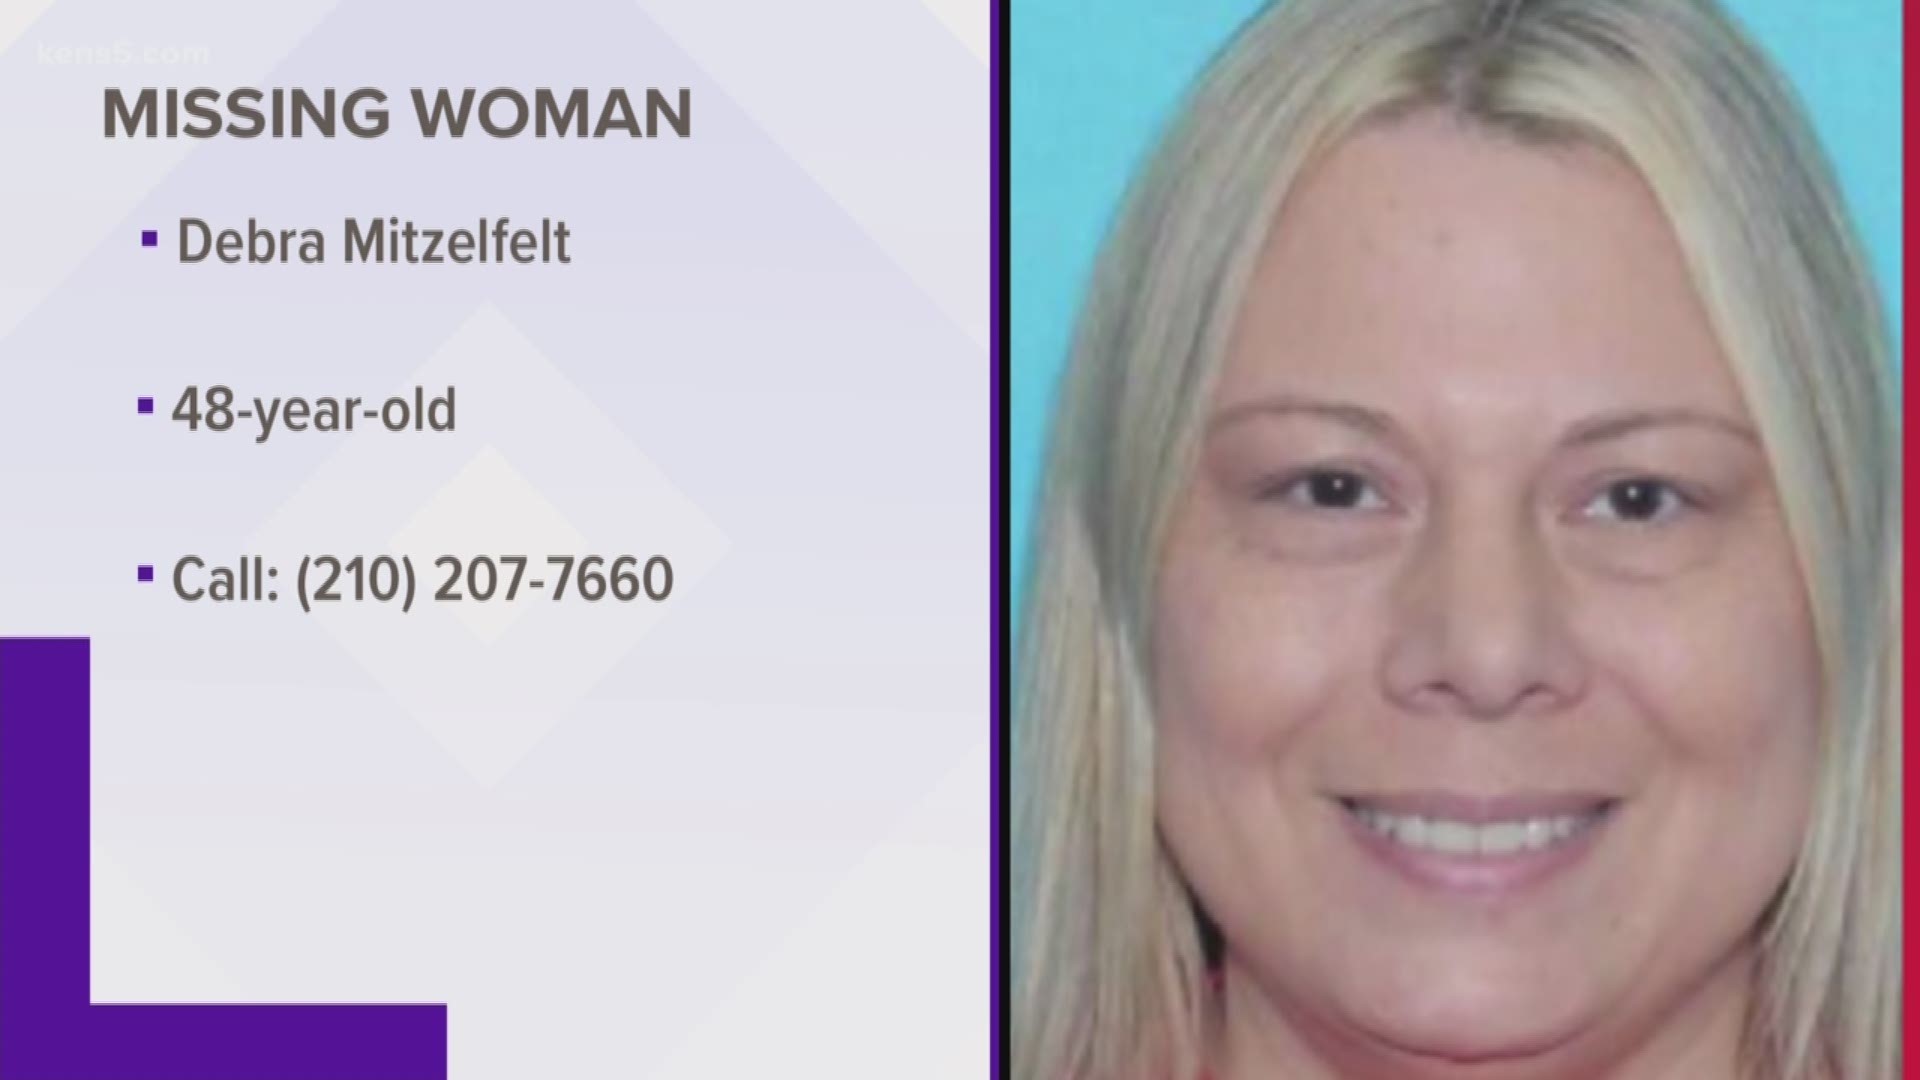 San Antonio Police are searching for 48-year-old Debra Sue Mitzelfelt who was last seen around 7 a.m. on New Year's Eve.